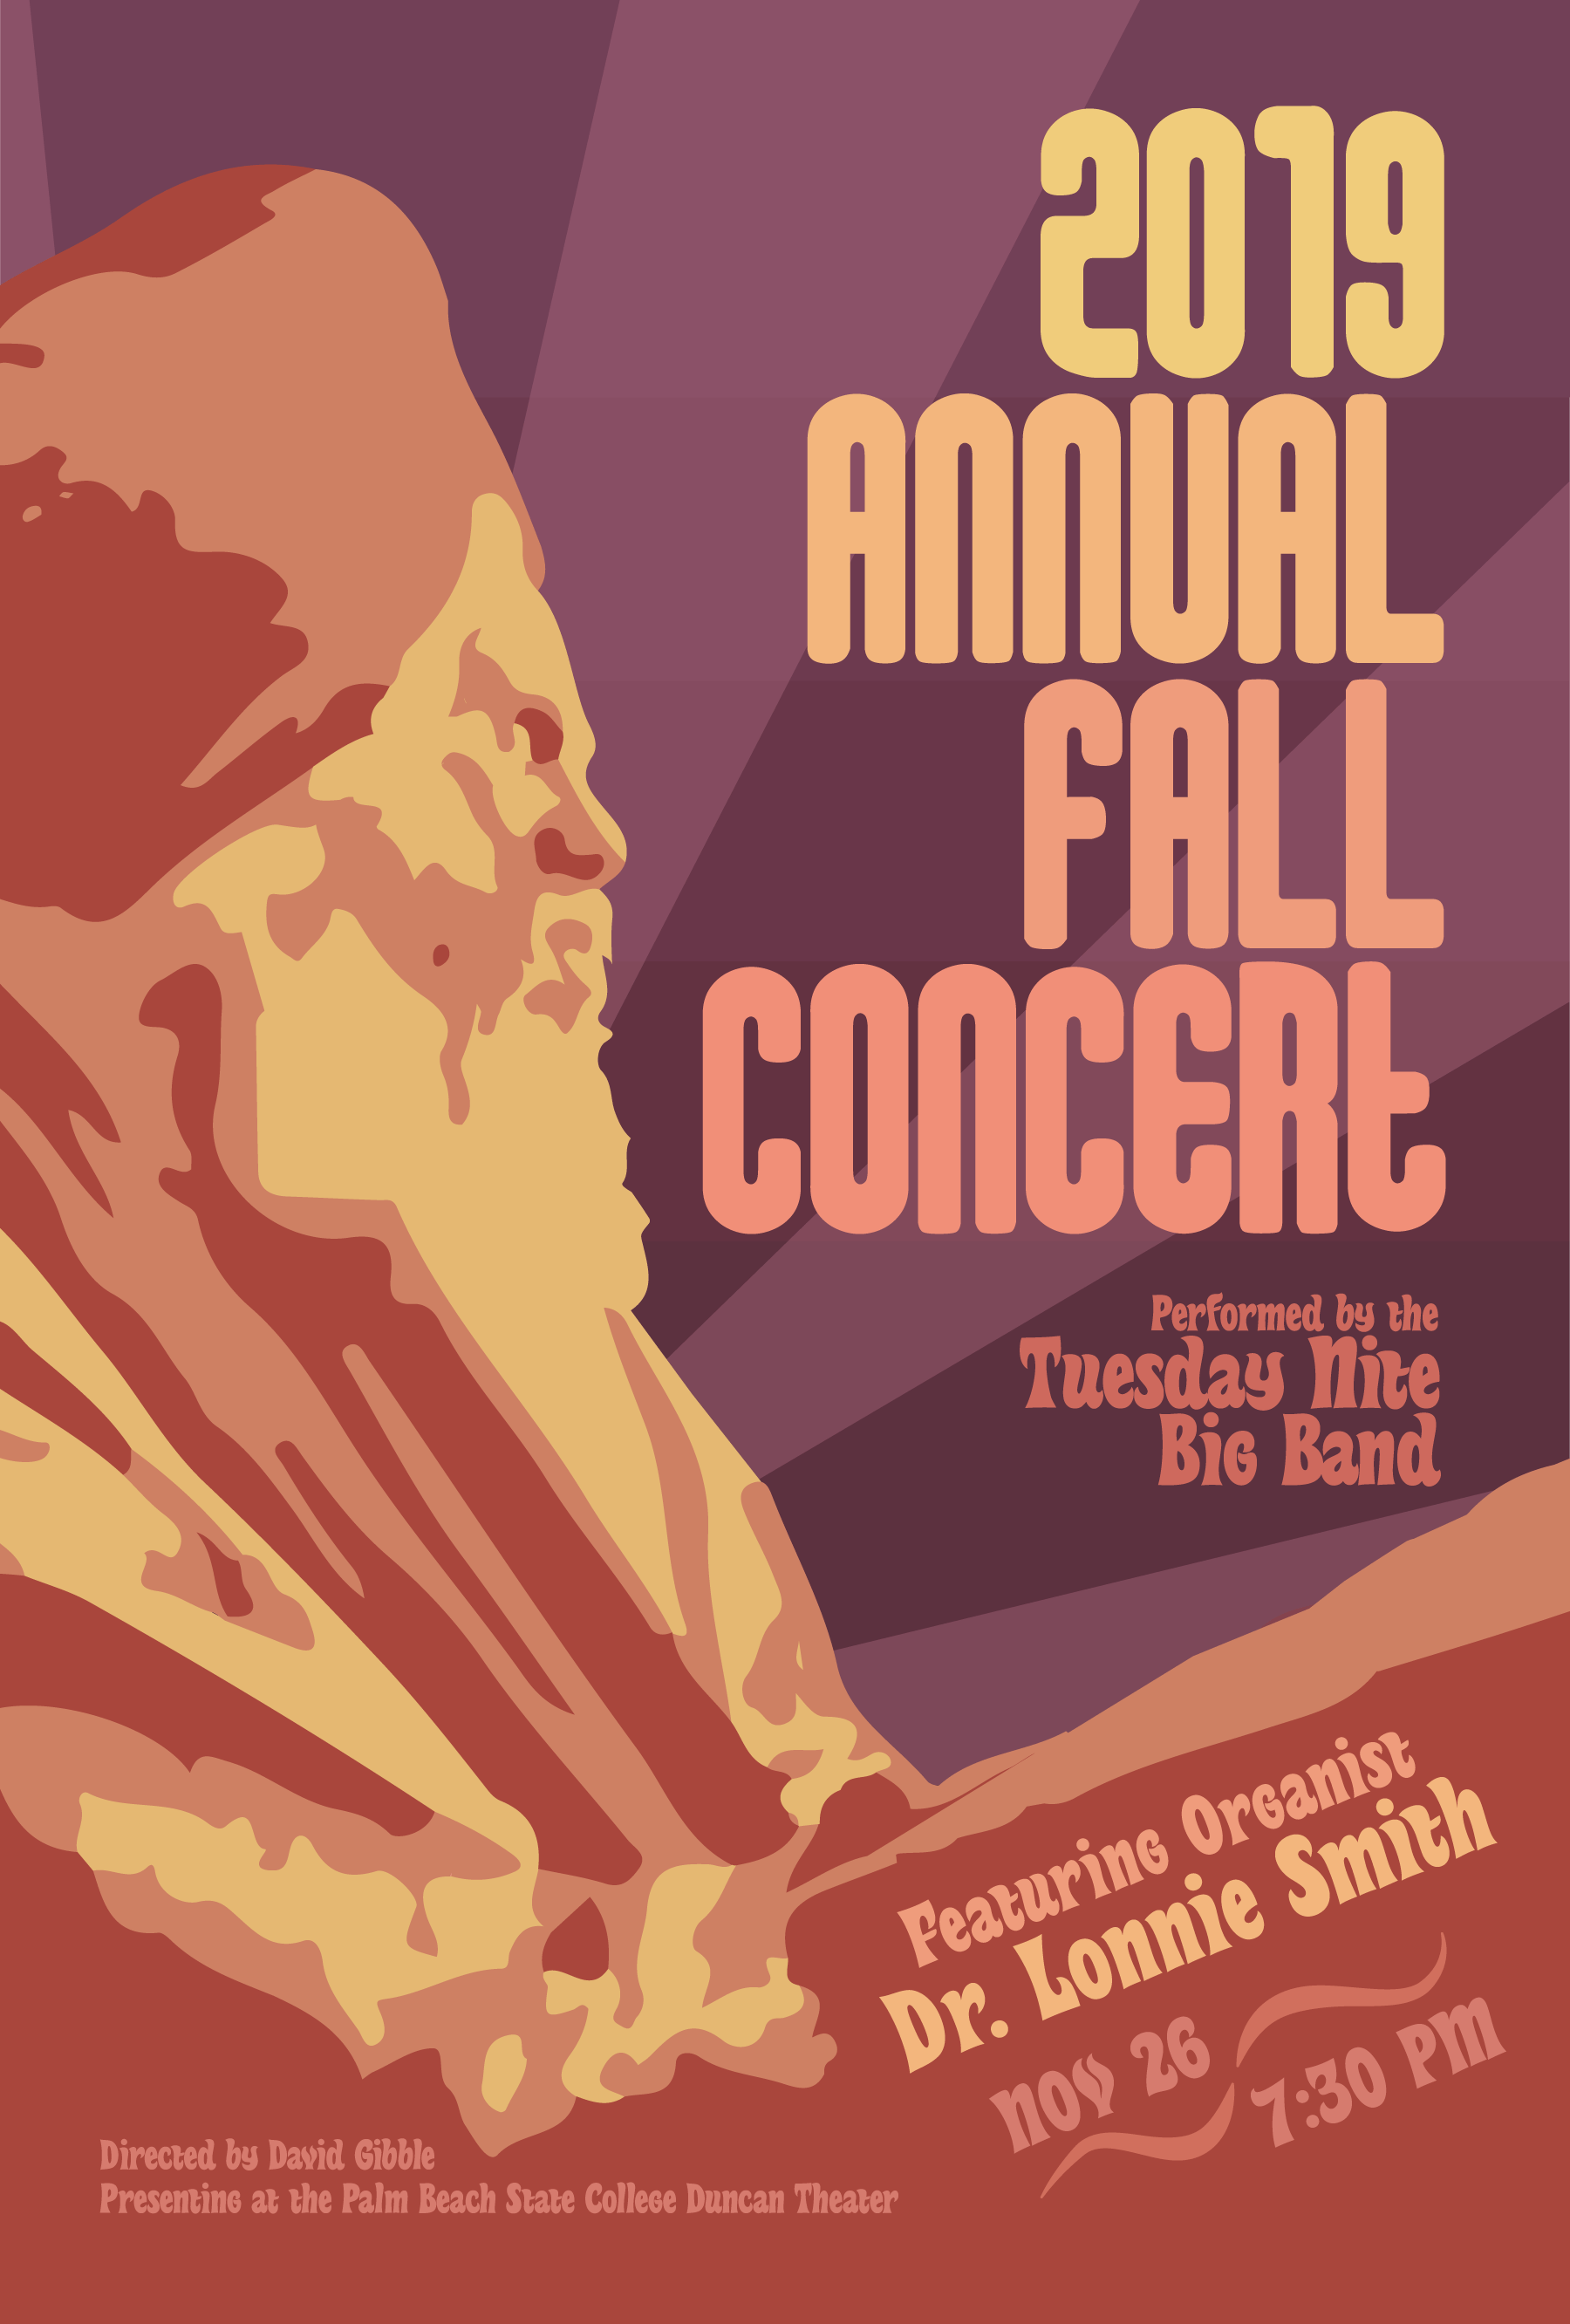 2019 Annual Fall Concert - Mailer